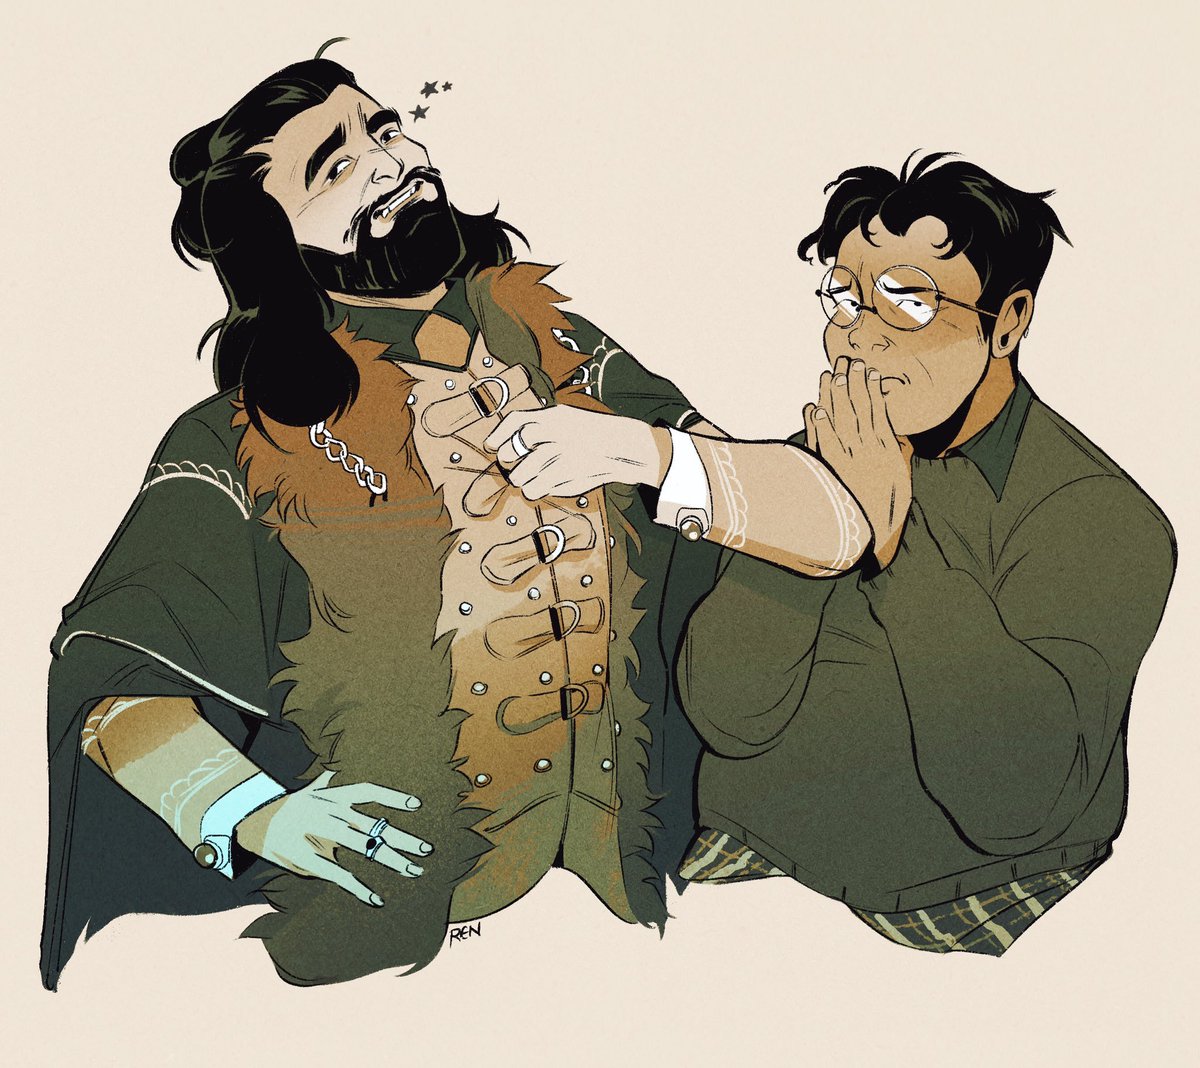 Shadows is back for season 3, so here is some of my older (and newer) fanart of the best characters Nandor and Guillermo #ShadowsFX 